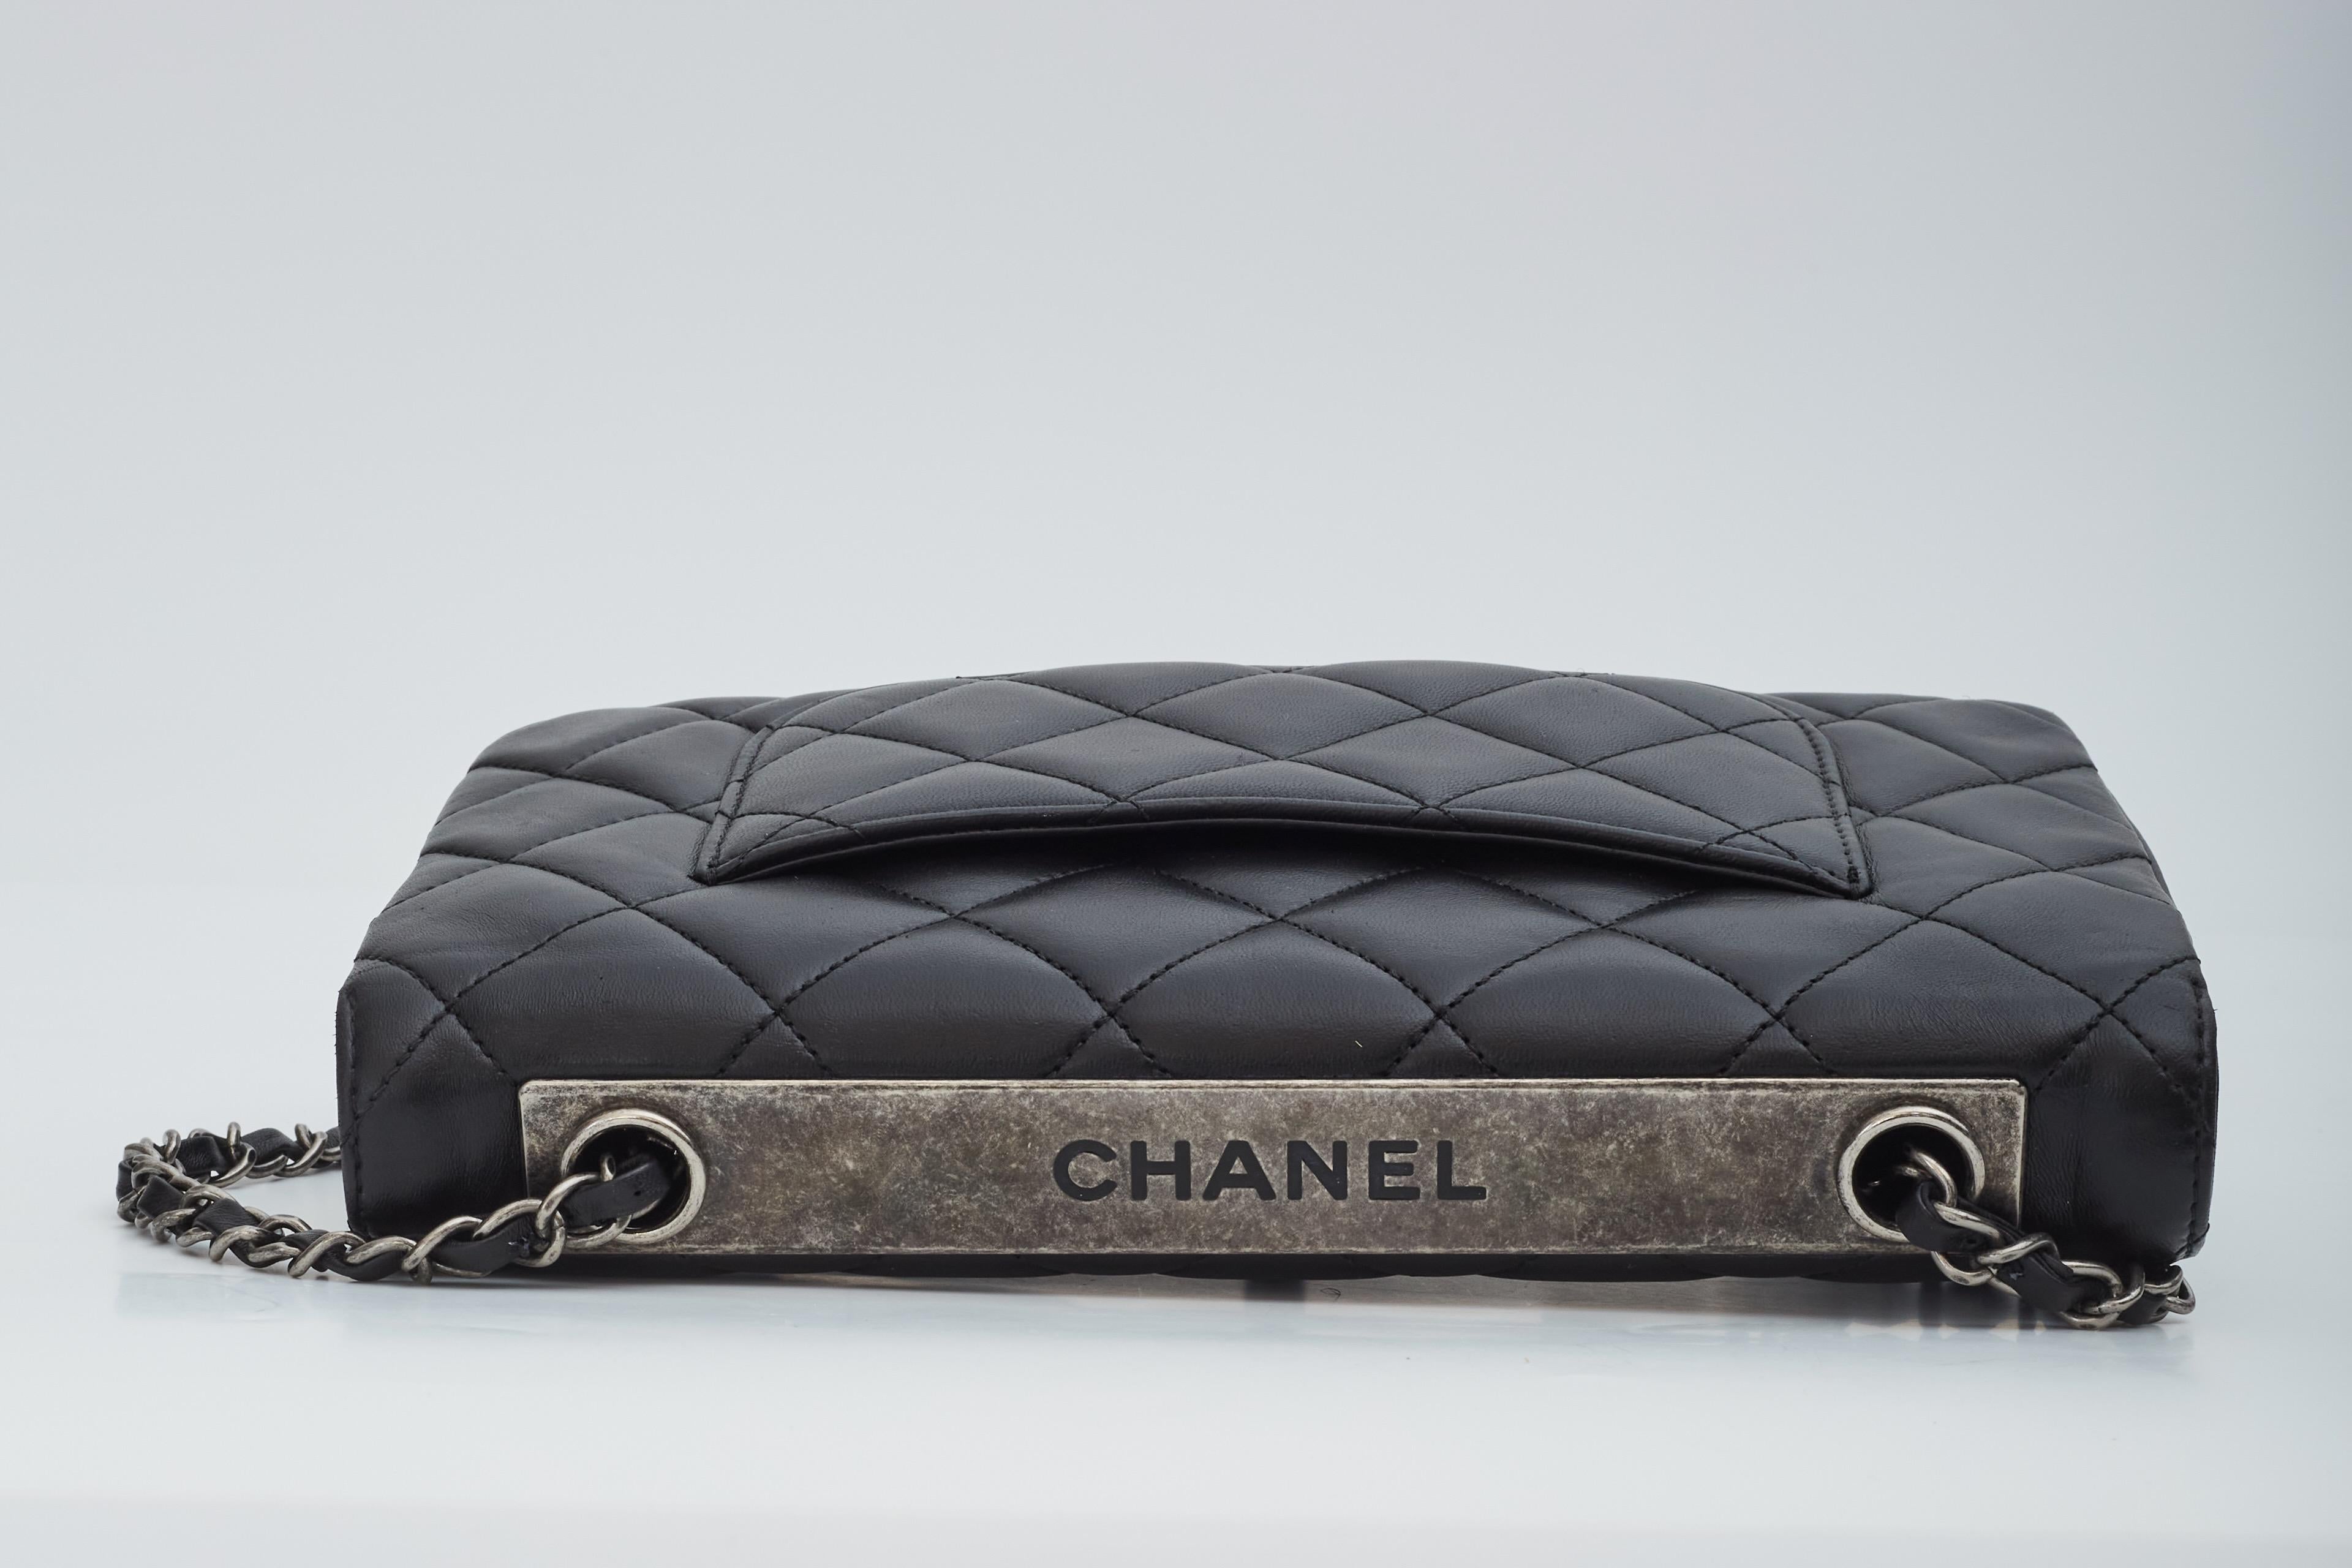 This Chanel Trendy bag is made with lambskin leather in black. The bag features diamond stitching, ruthenium hardware, as short should strap of chain and leather, cc turn lock closure, a front flap and a partitioned interior with burgundy leather